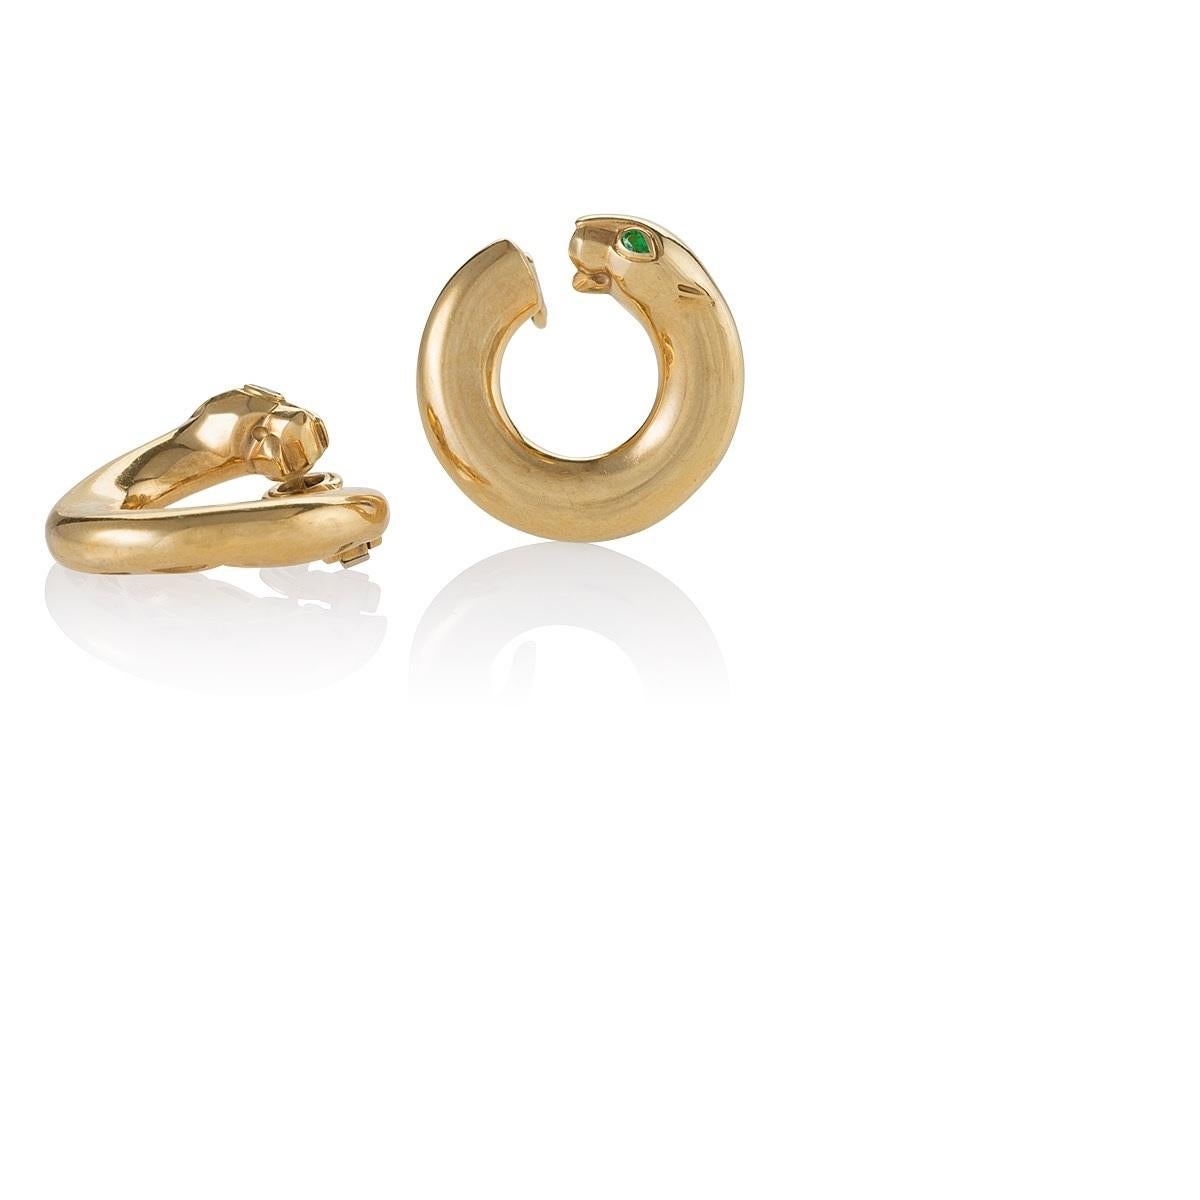 A pair of French Late-20th Century 18 karat polished gold earrings with emeralds by Cartier. The earrings have 2 pear cut emeralds with an approximate total weight of .10 carat. The earrings are designed as hoops ending with the distinctive panther